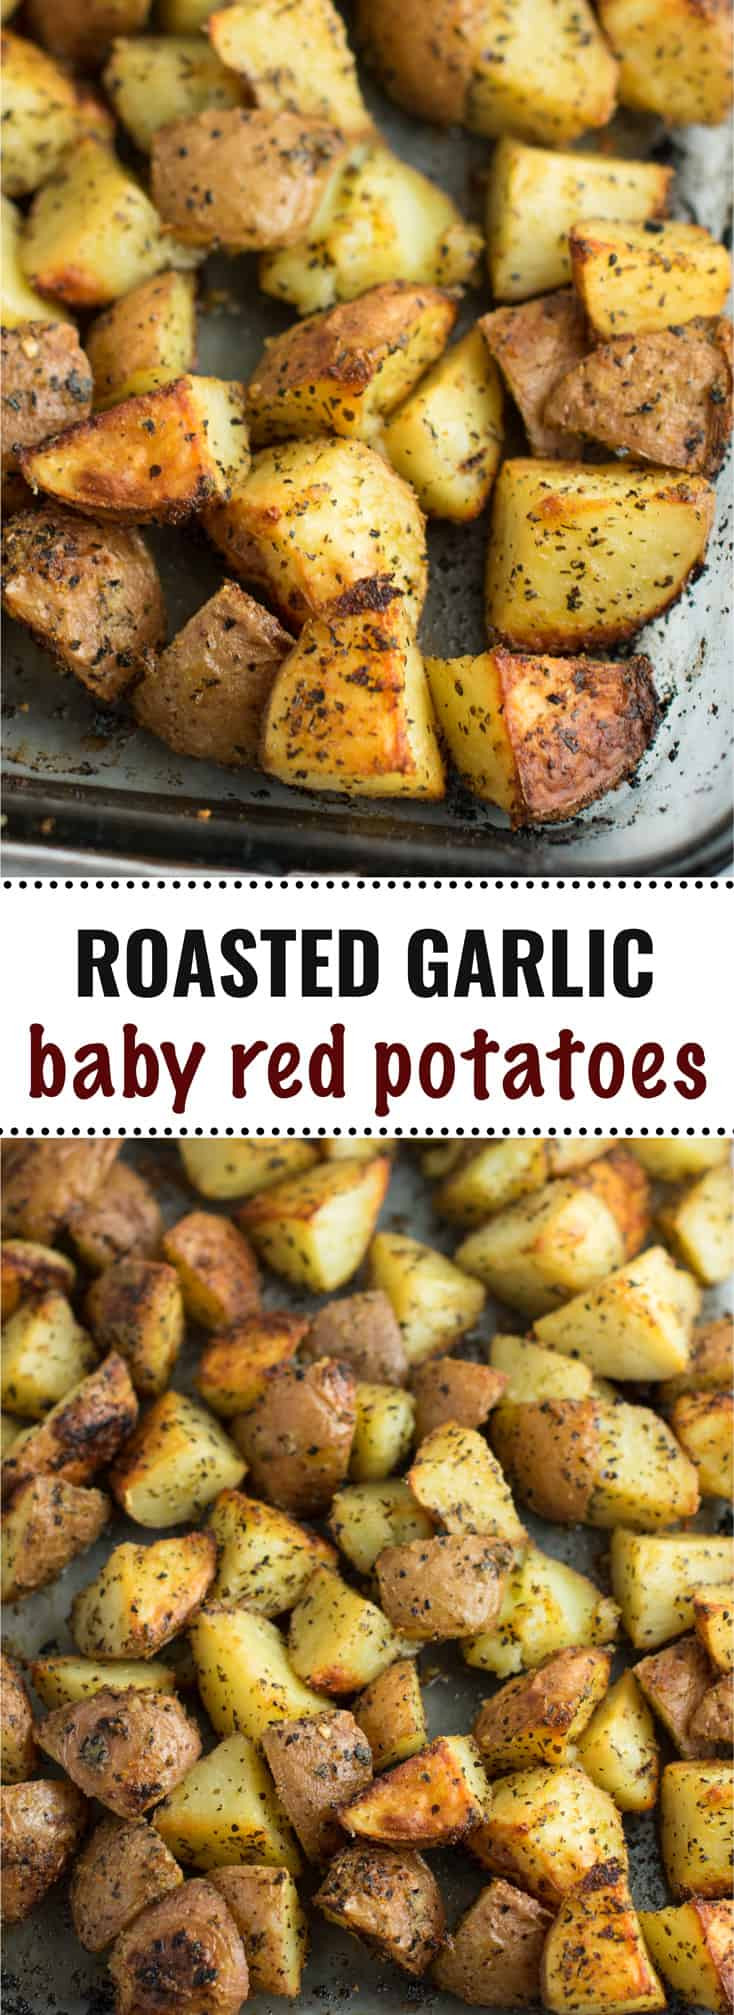 Roasted Baby Potatoes Recipes
 Roasted Baby Red Potatoes Recipe Build Your Bite